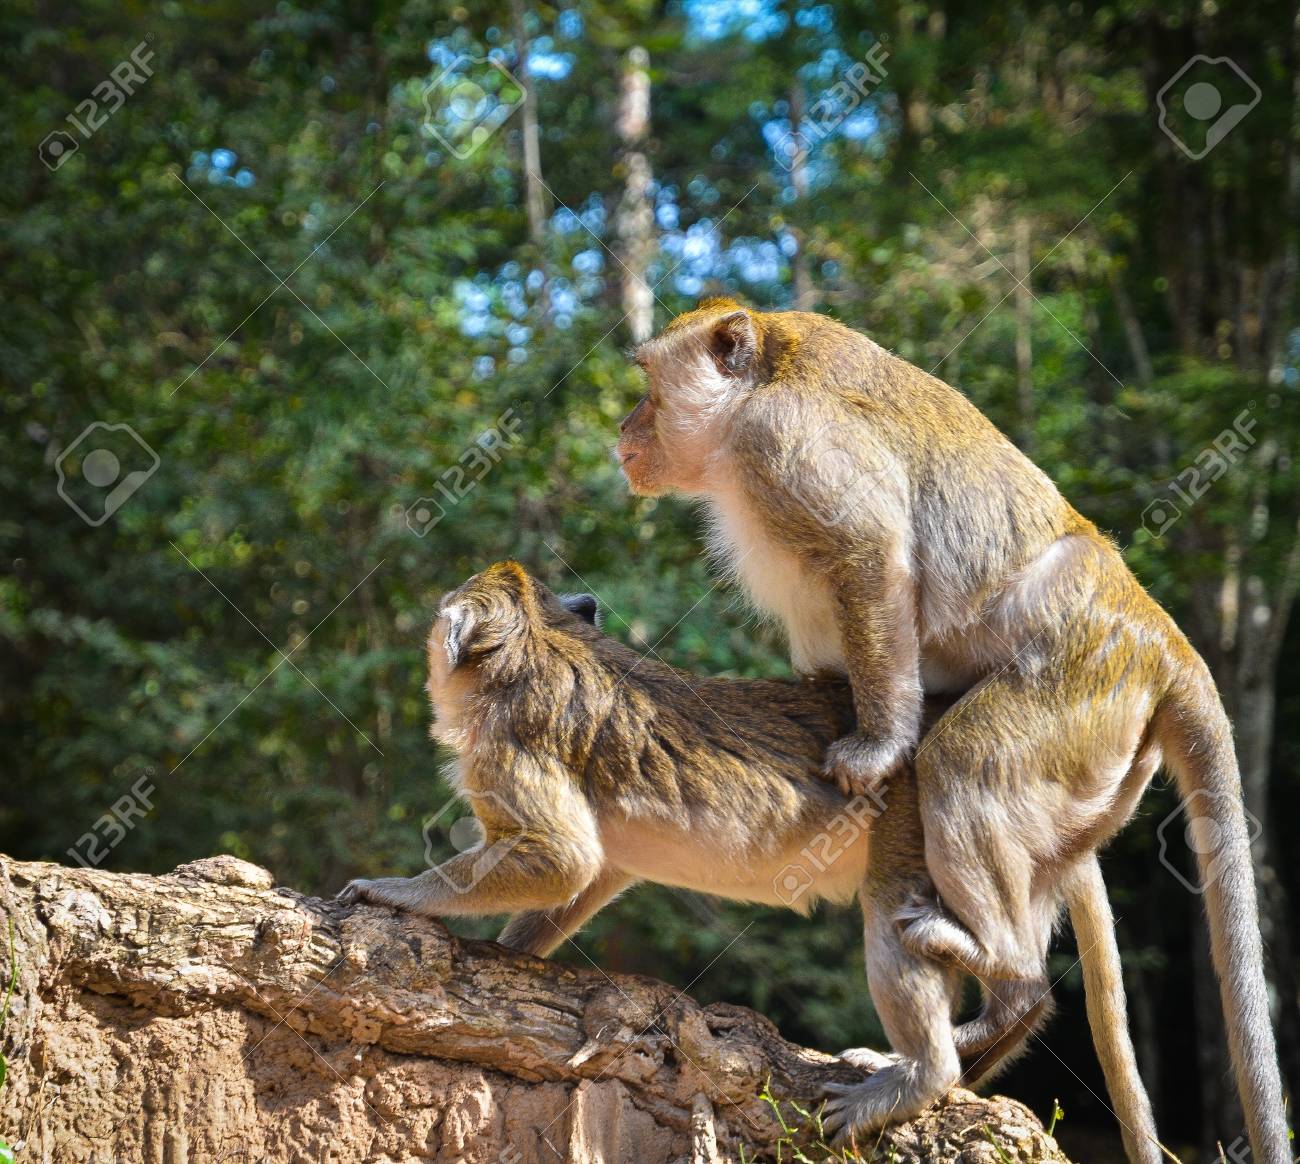 Picture of monkey having sex